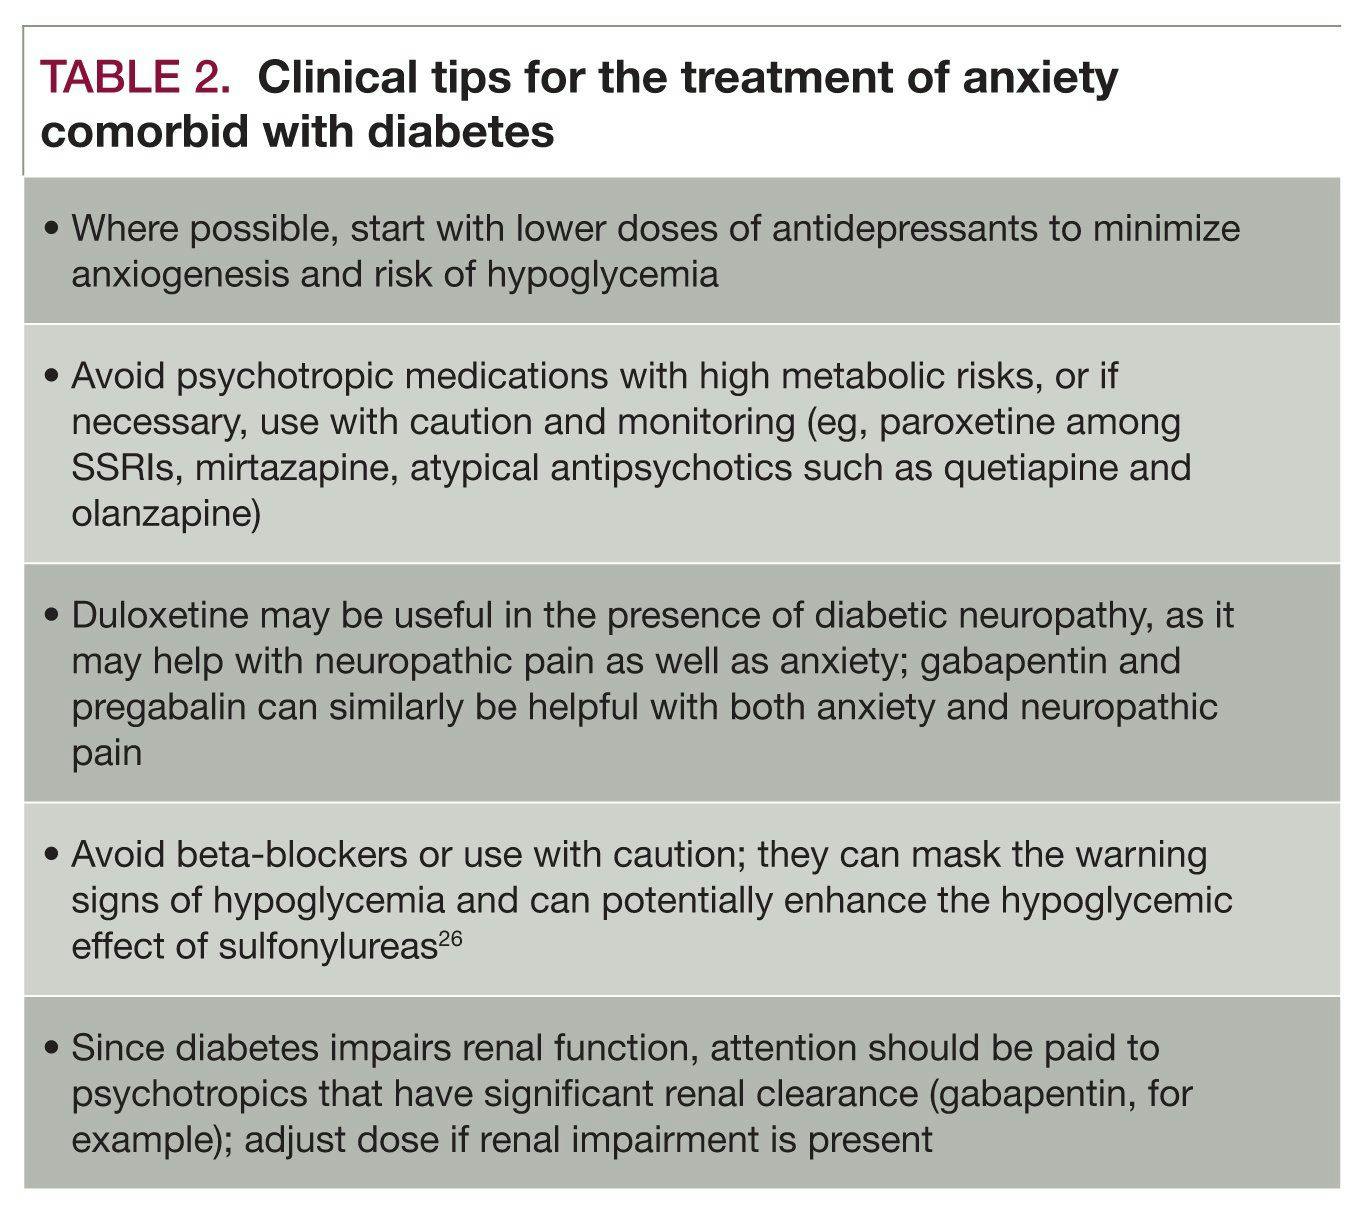 Clinical tips for the treatment of anxiety comorbid with diabetes